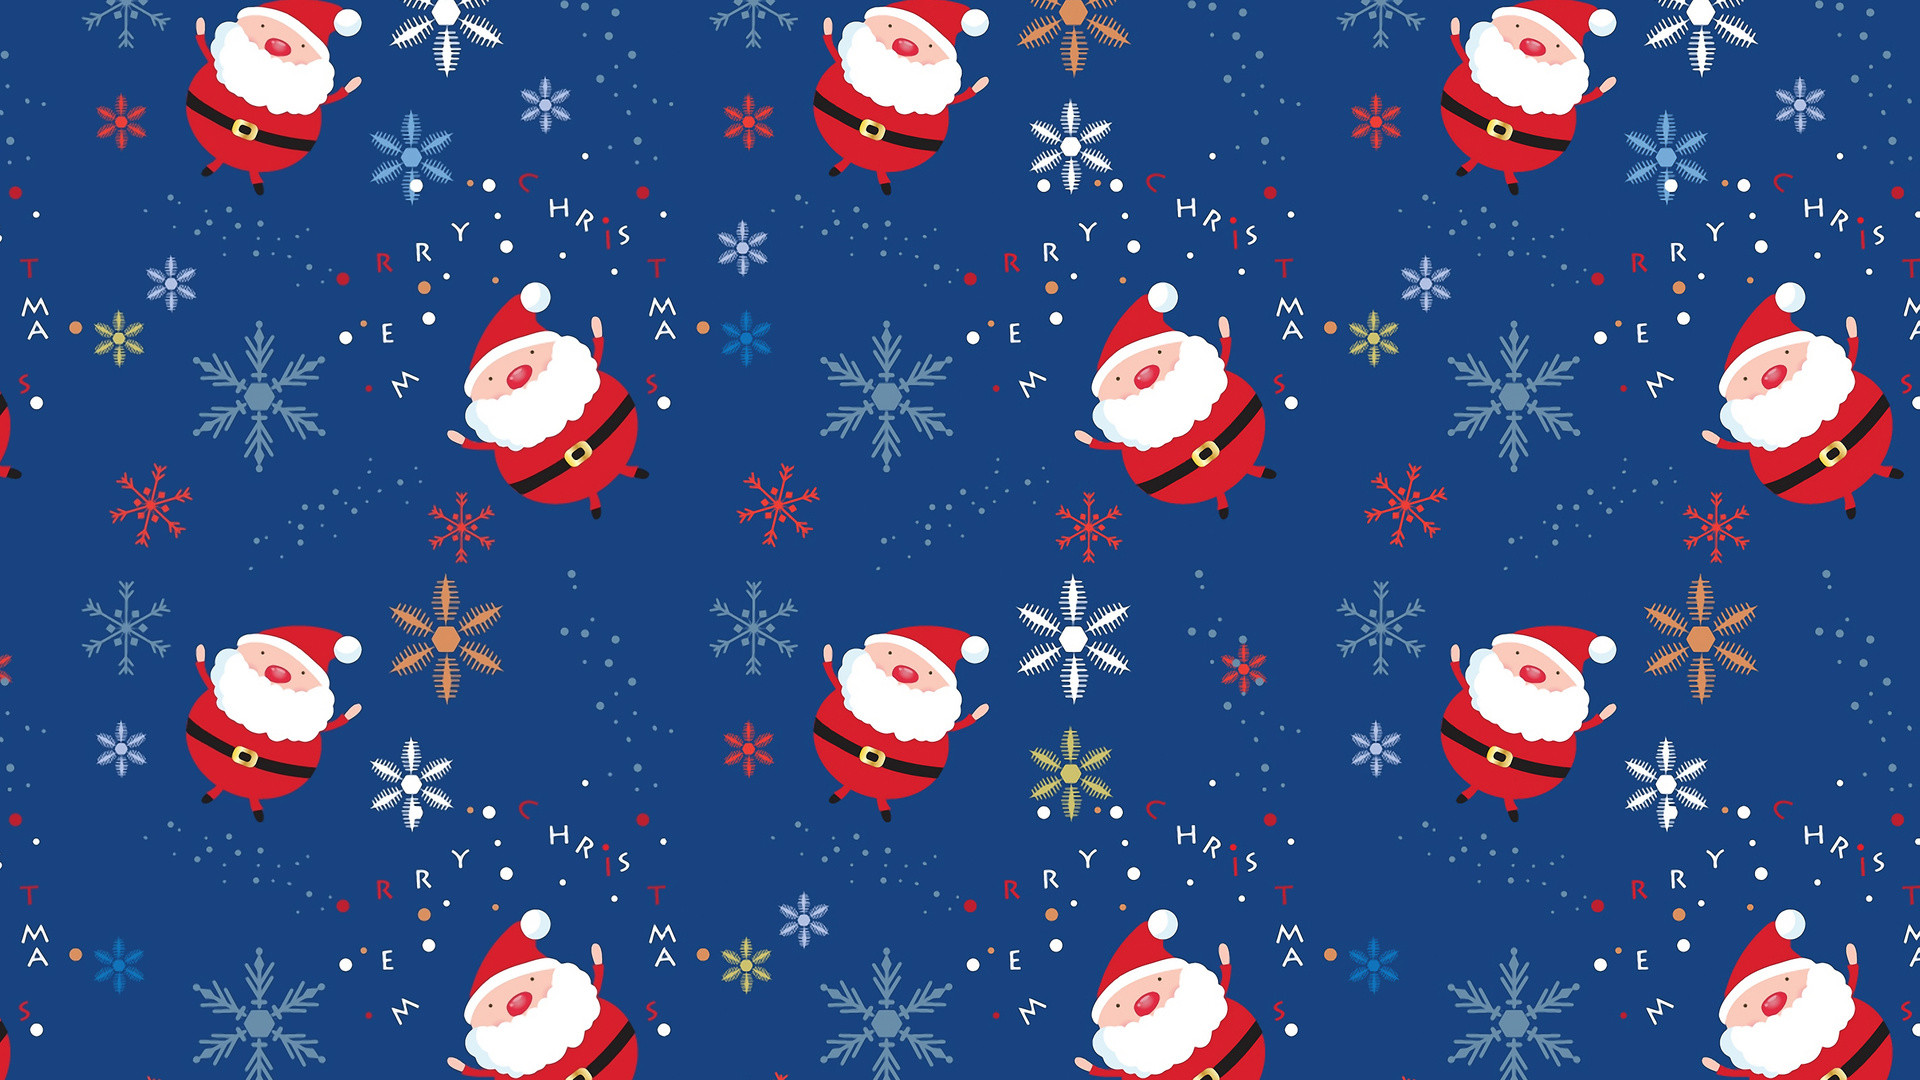 1920x1080 hd cute christmas background amazing images smart phone background photos  download free images widescreen desktop backgrounds